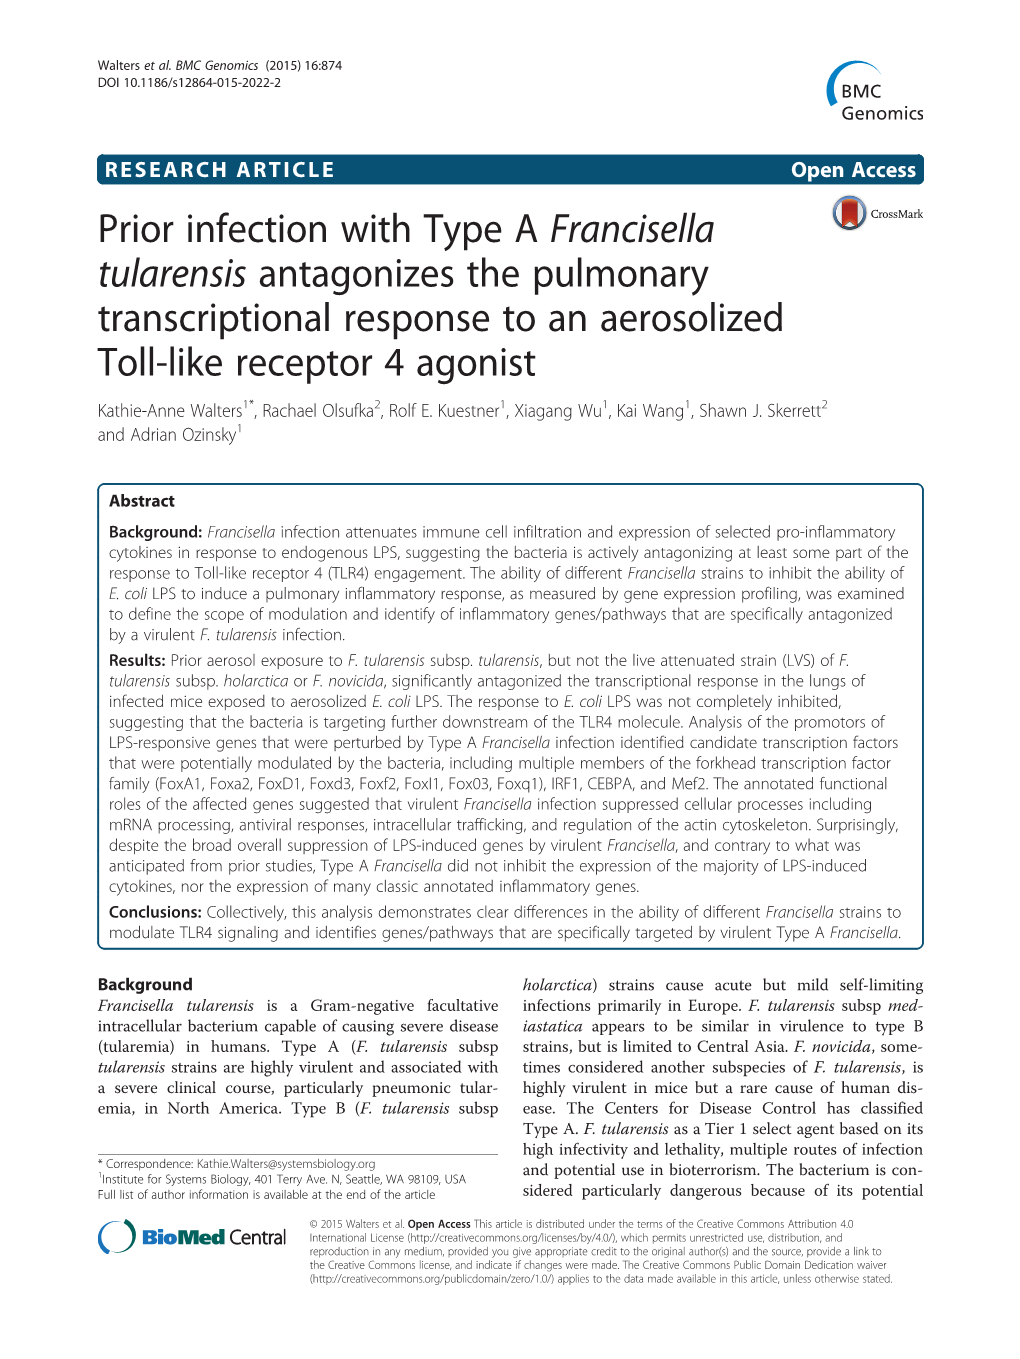 Prior Infection with Type a Francisella Tularensis Antagonizes The